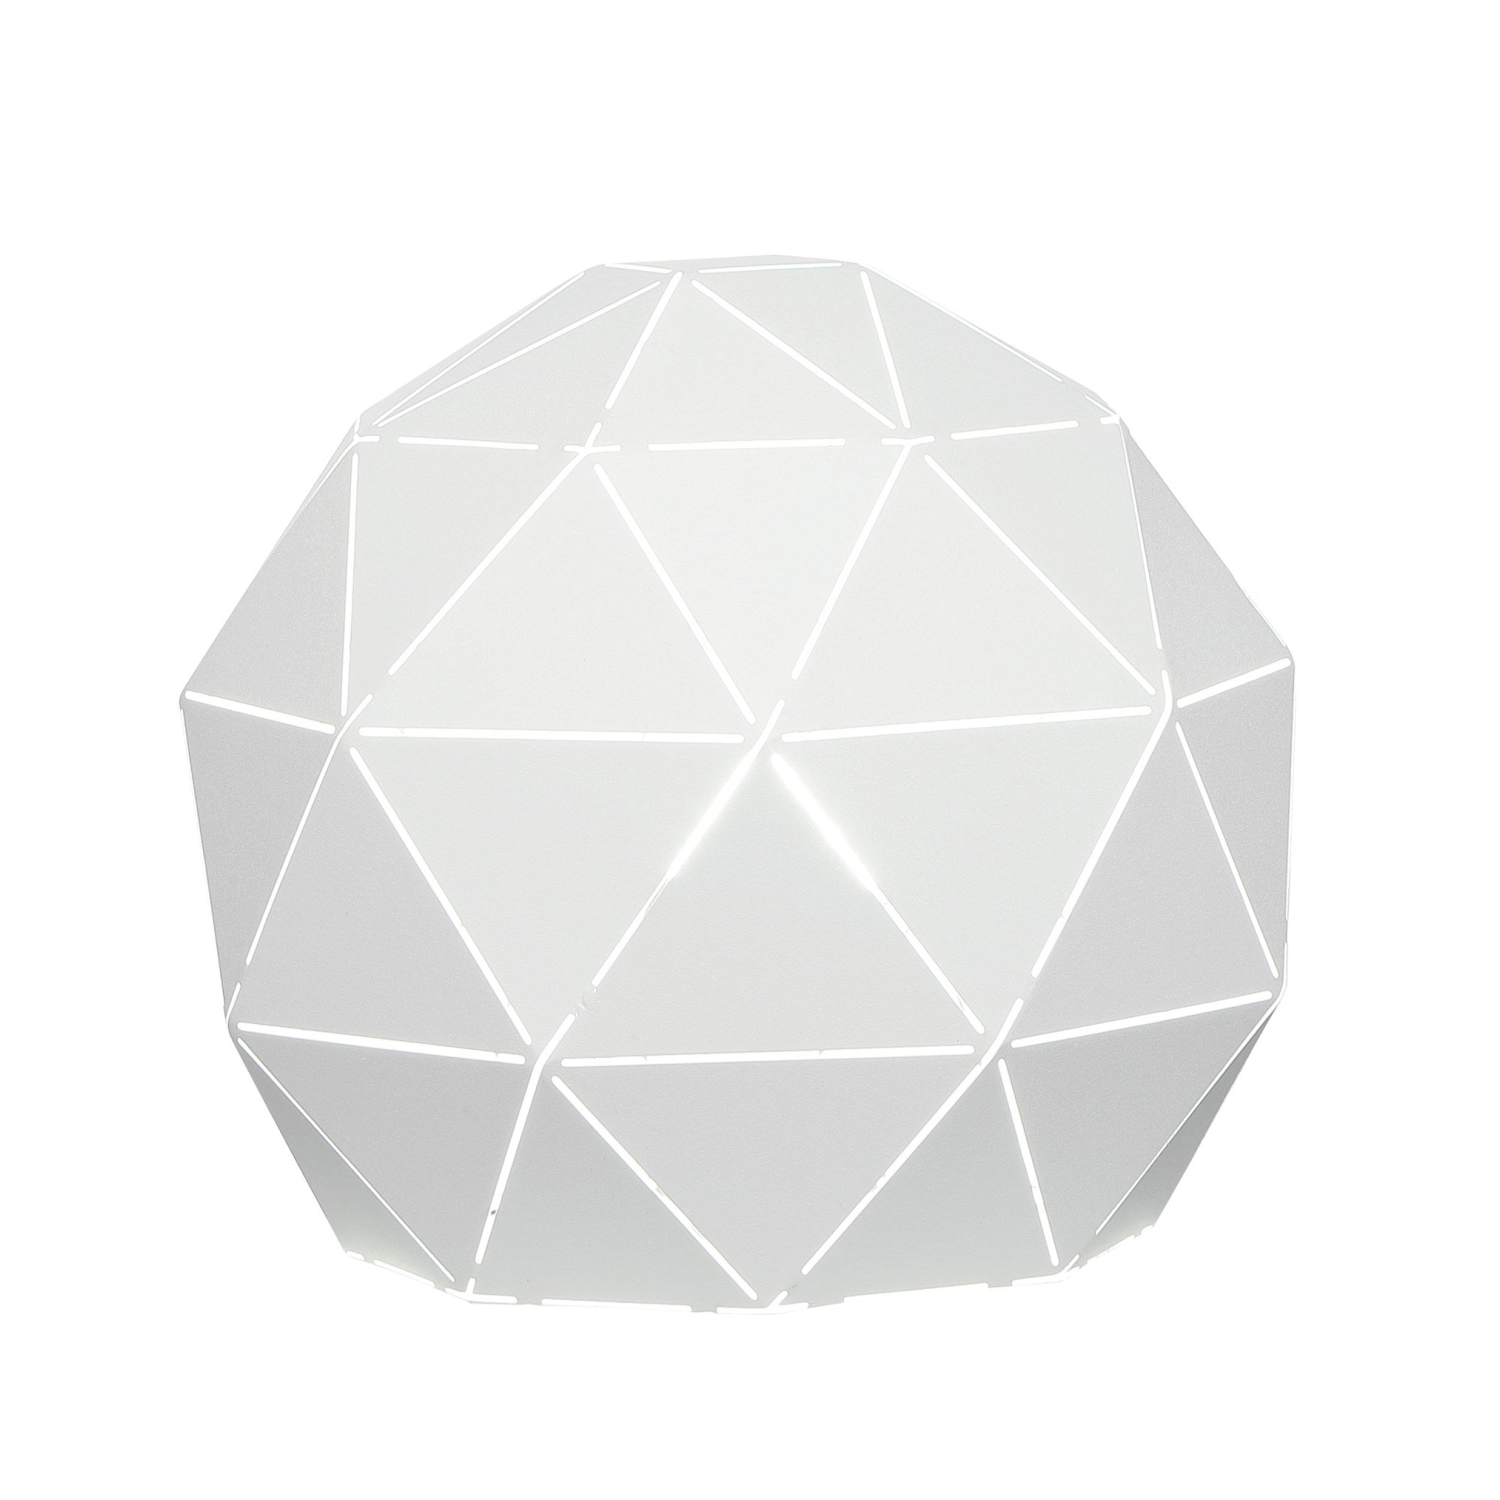 Pandora Table Lamp Picture with White Background